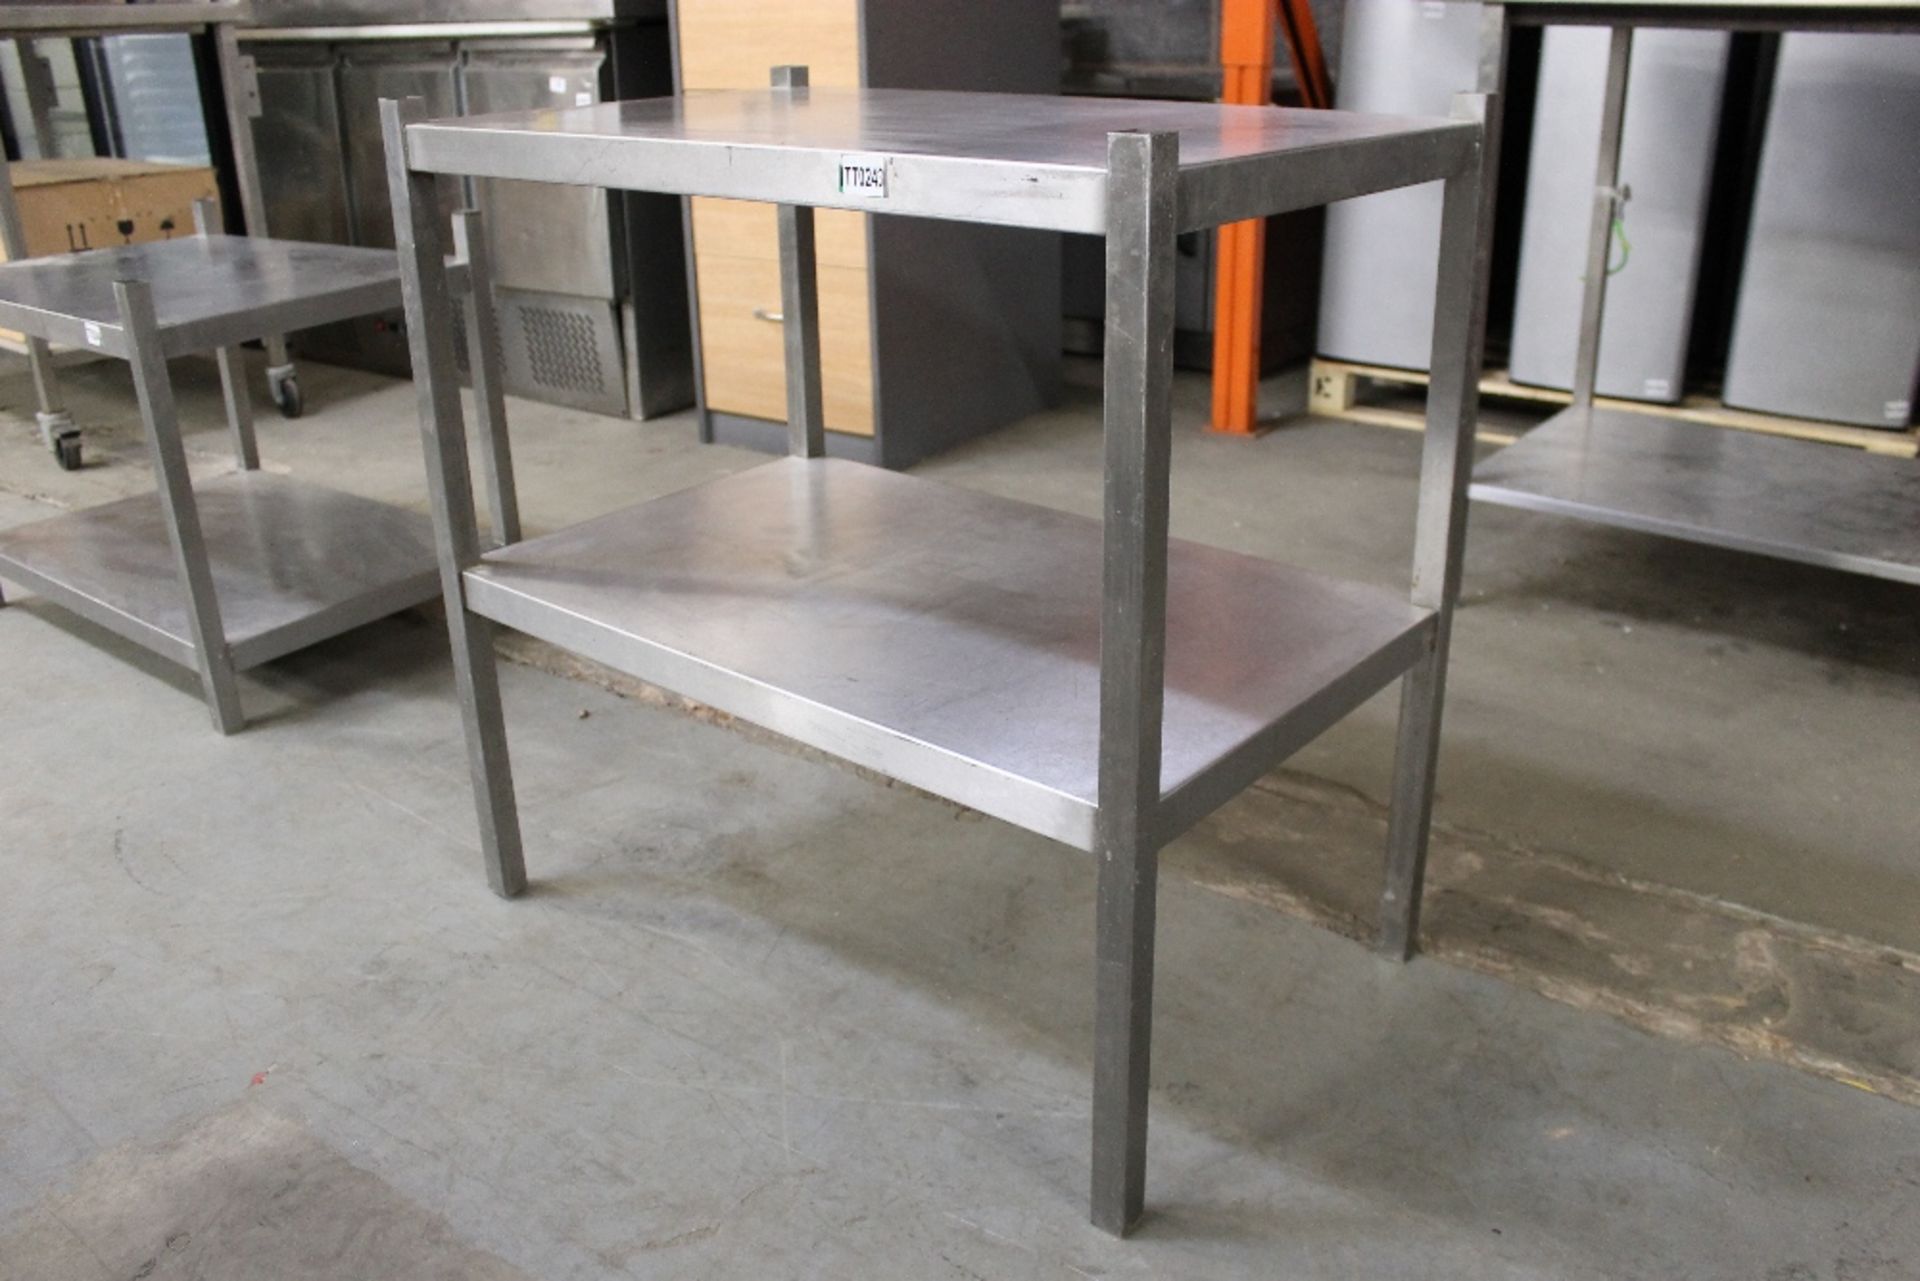 Stainless Steel Appliance Stand - Image 2 of 2